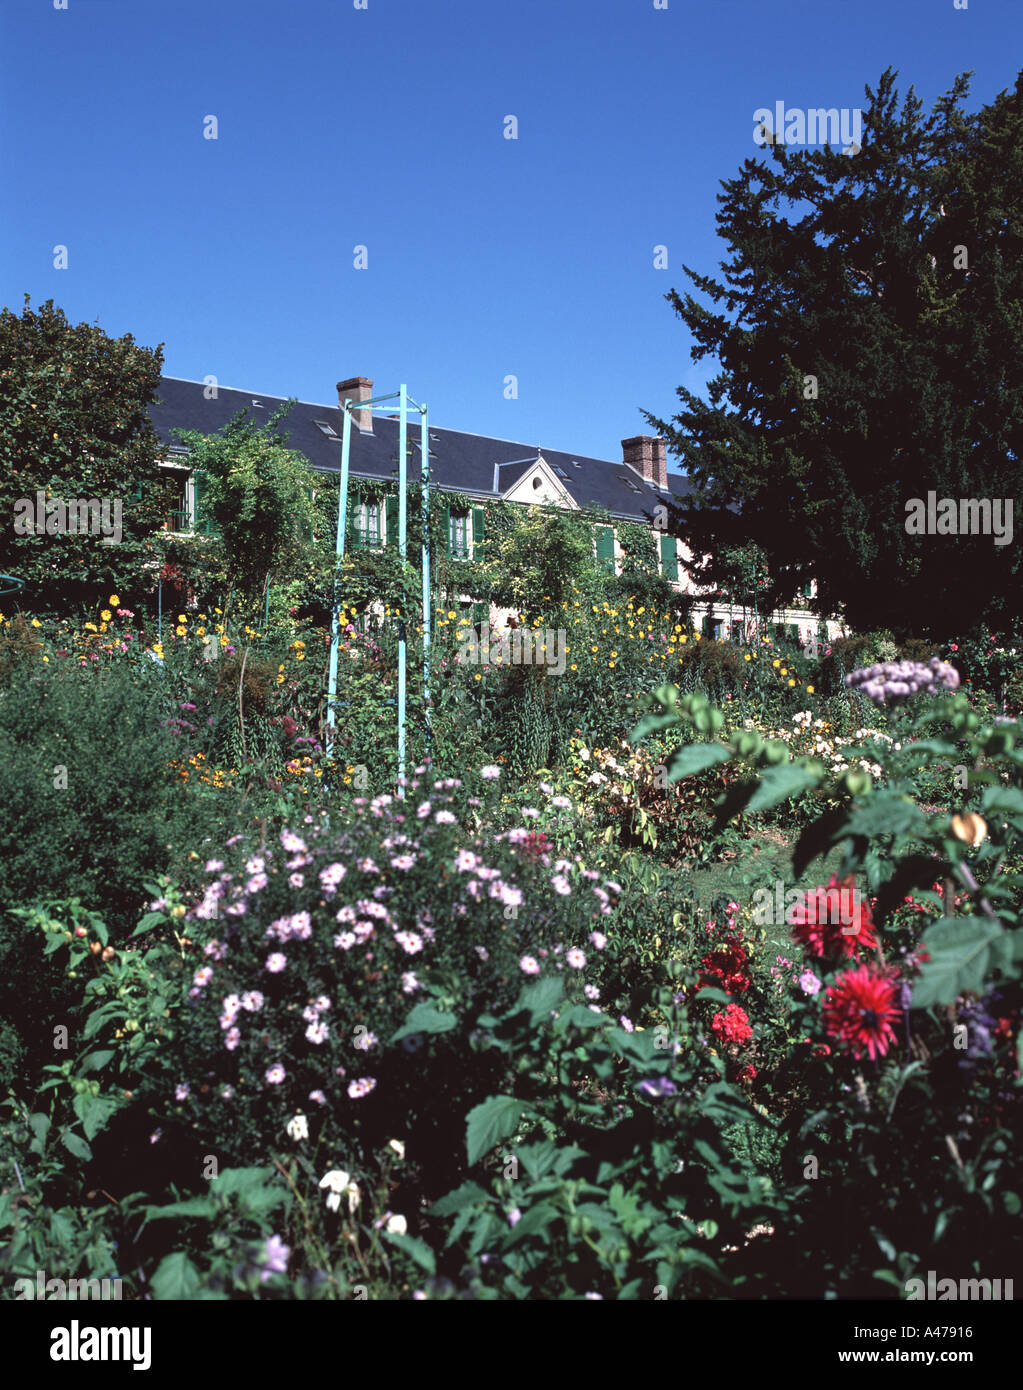 Monet s Garden at Giverny Stock Photo - Alamy